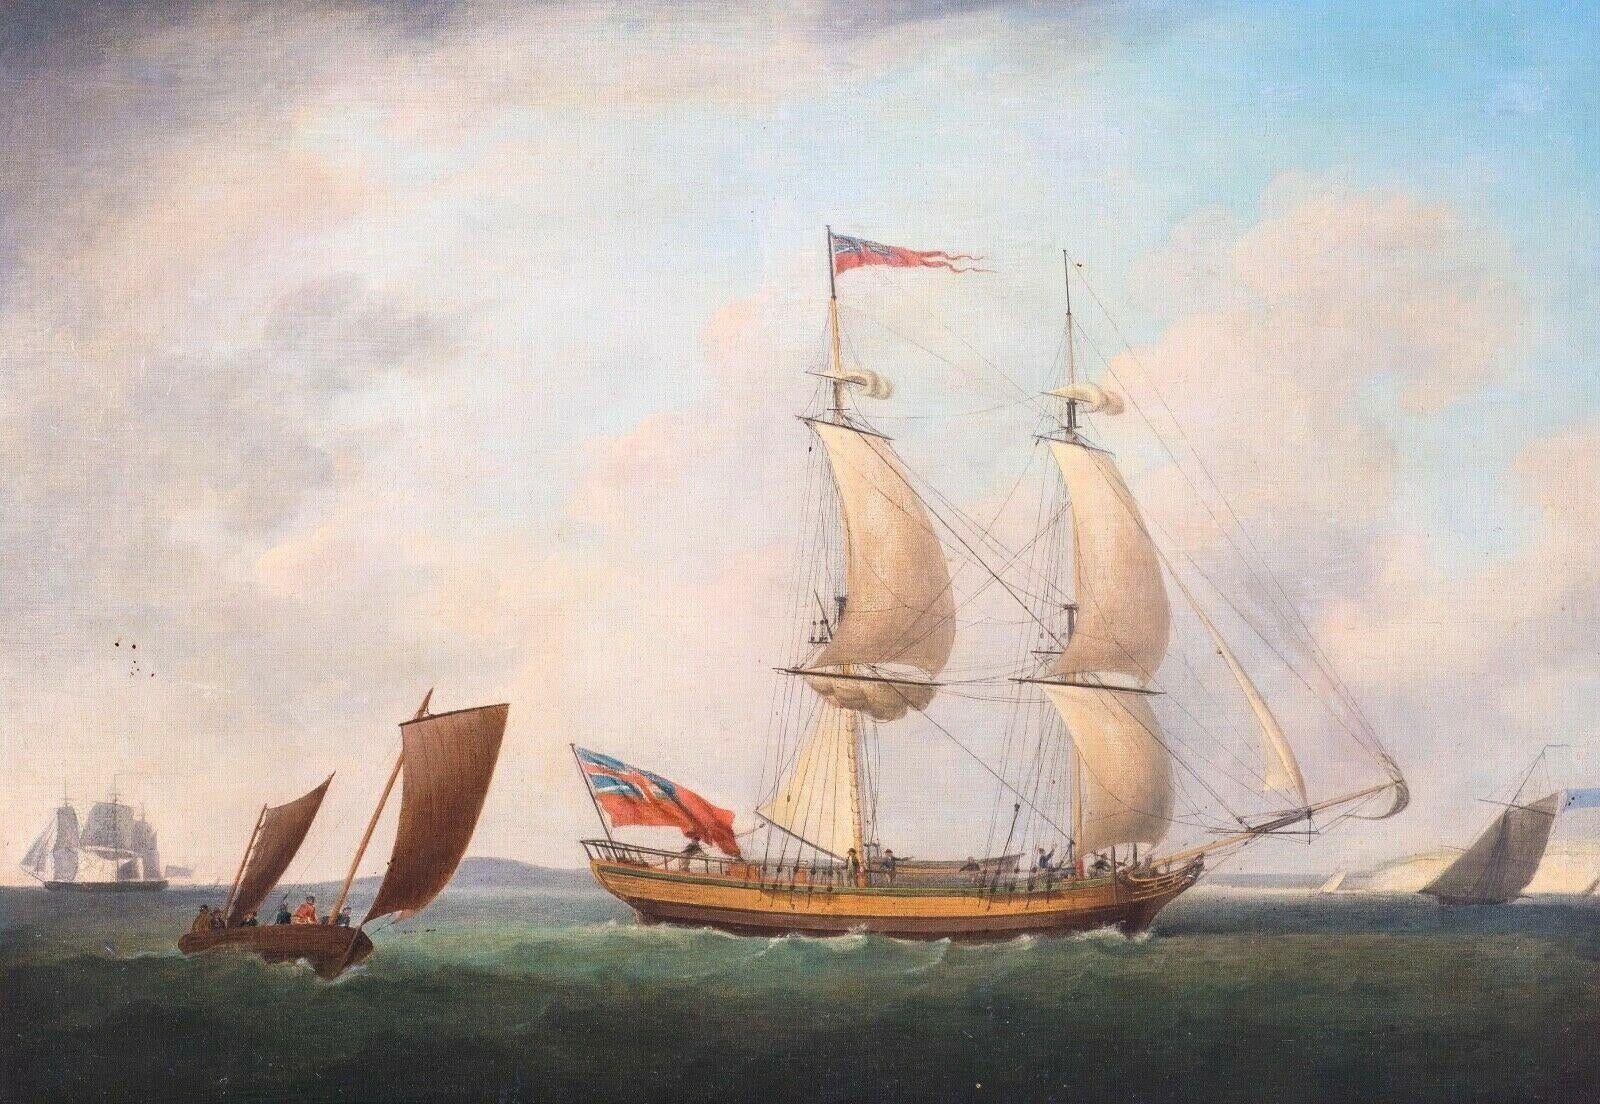 Ships Sailing Off The Coast, 18th Century - Painting by Dominic Serres